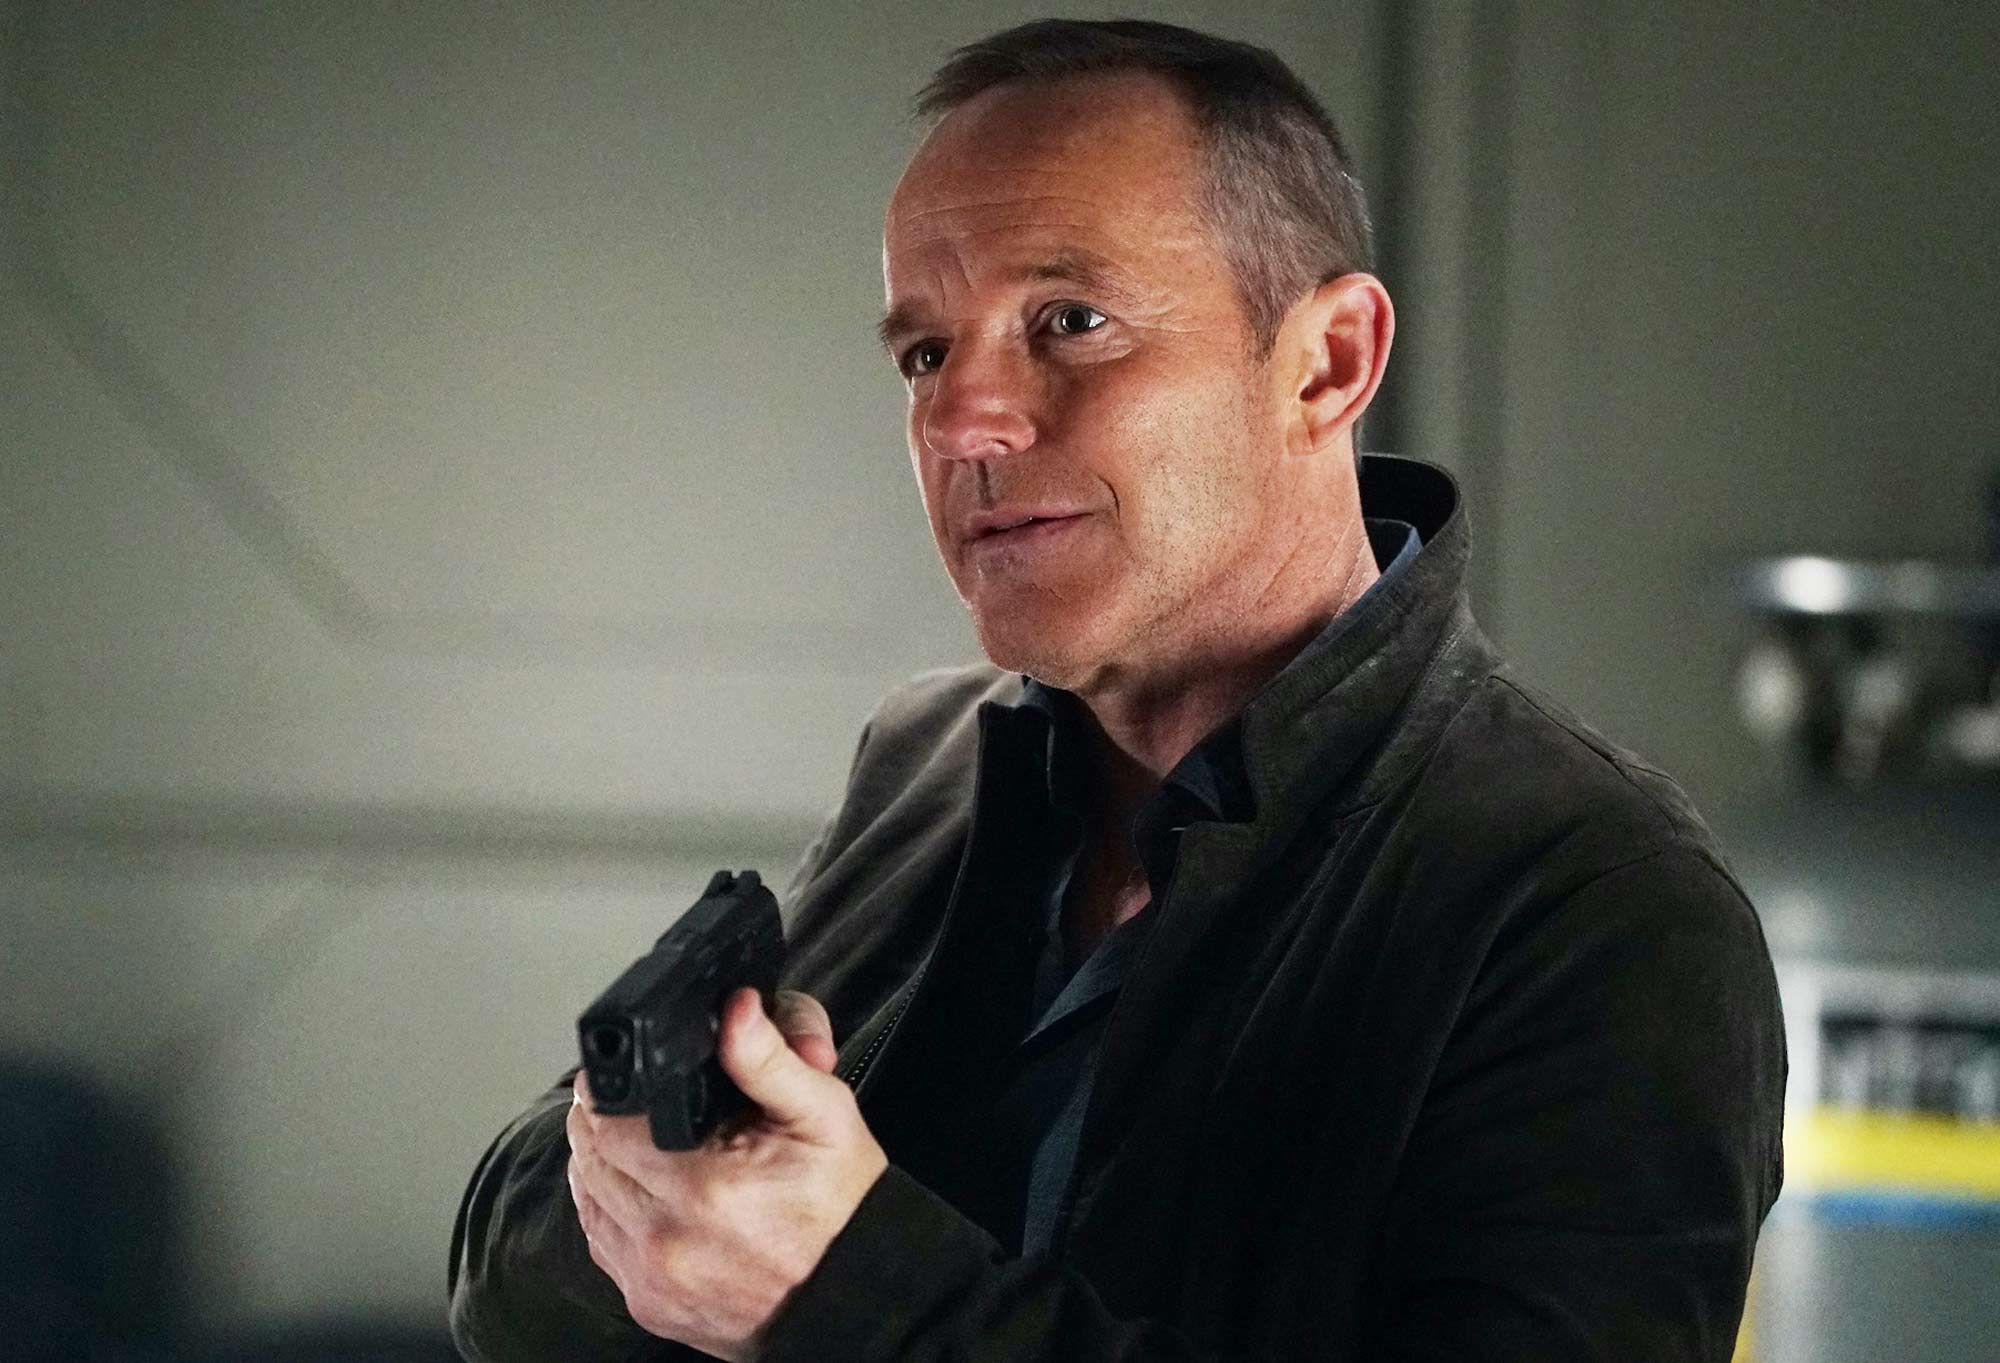 Agents of SHIELD killed off Coulson because everyone thought the